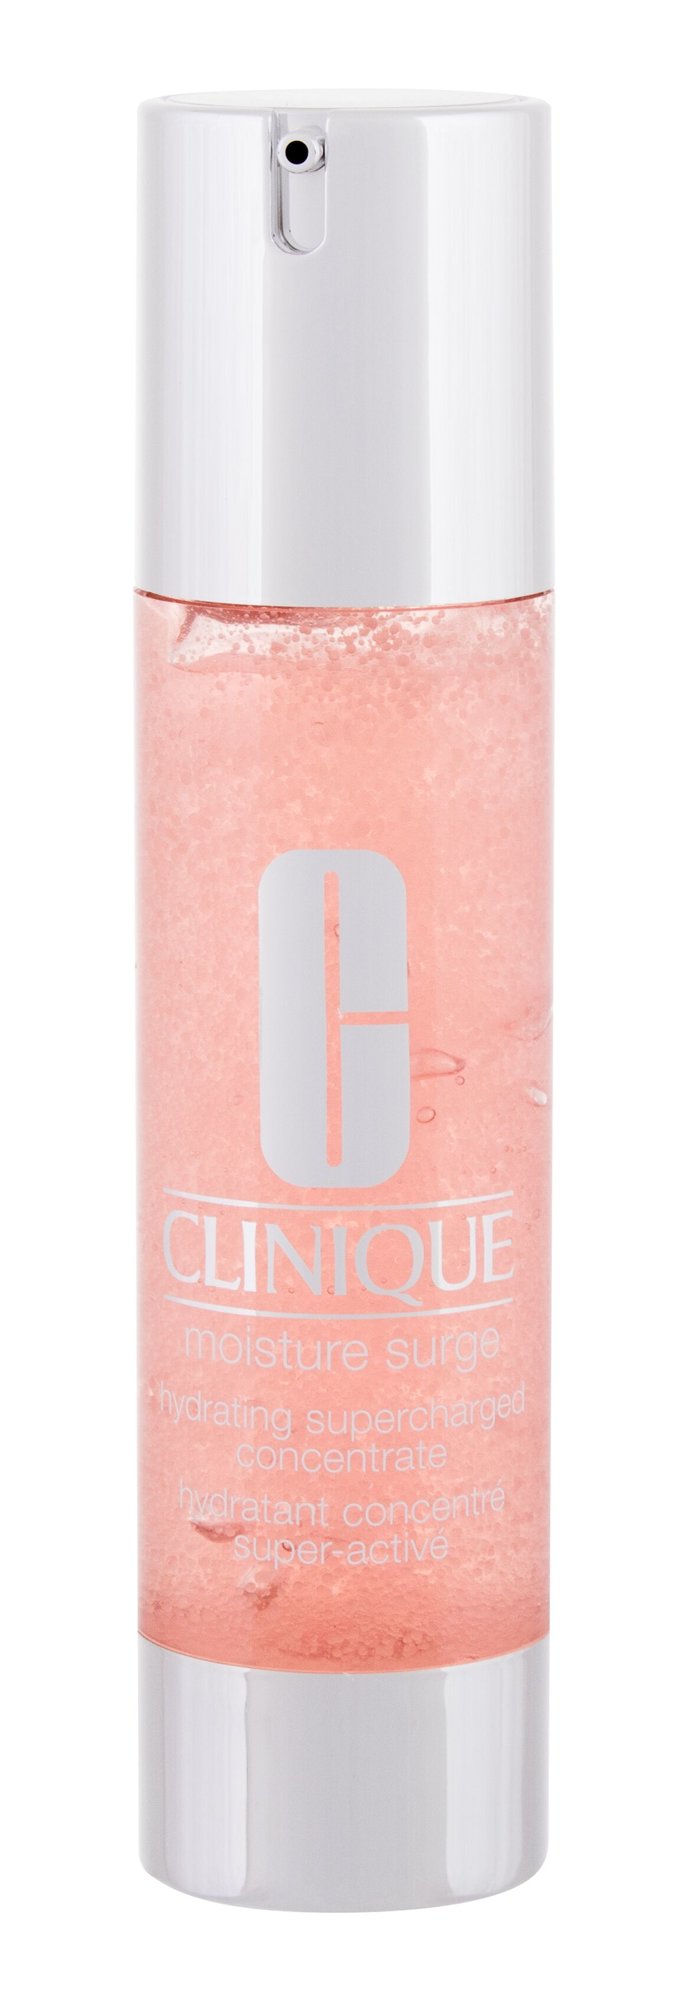 Clinique Moisture Surge Hydrating Supercharged Concentrate 95ml Veido serumas